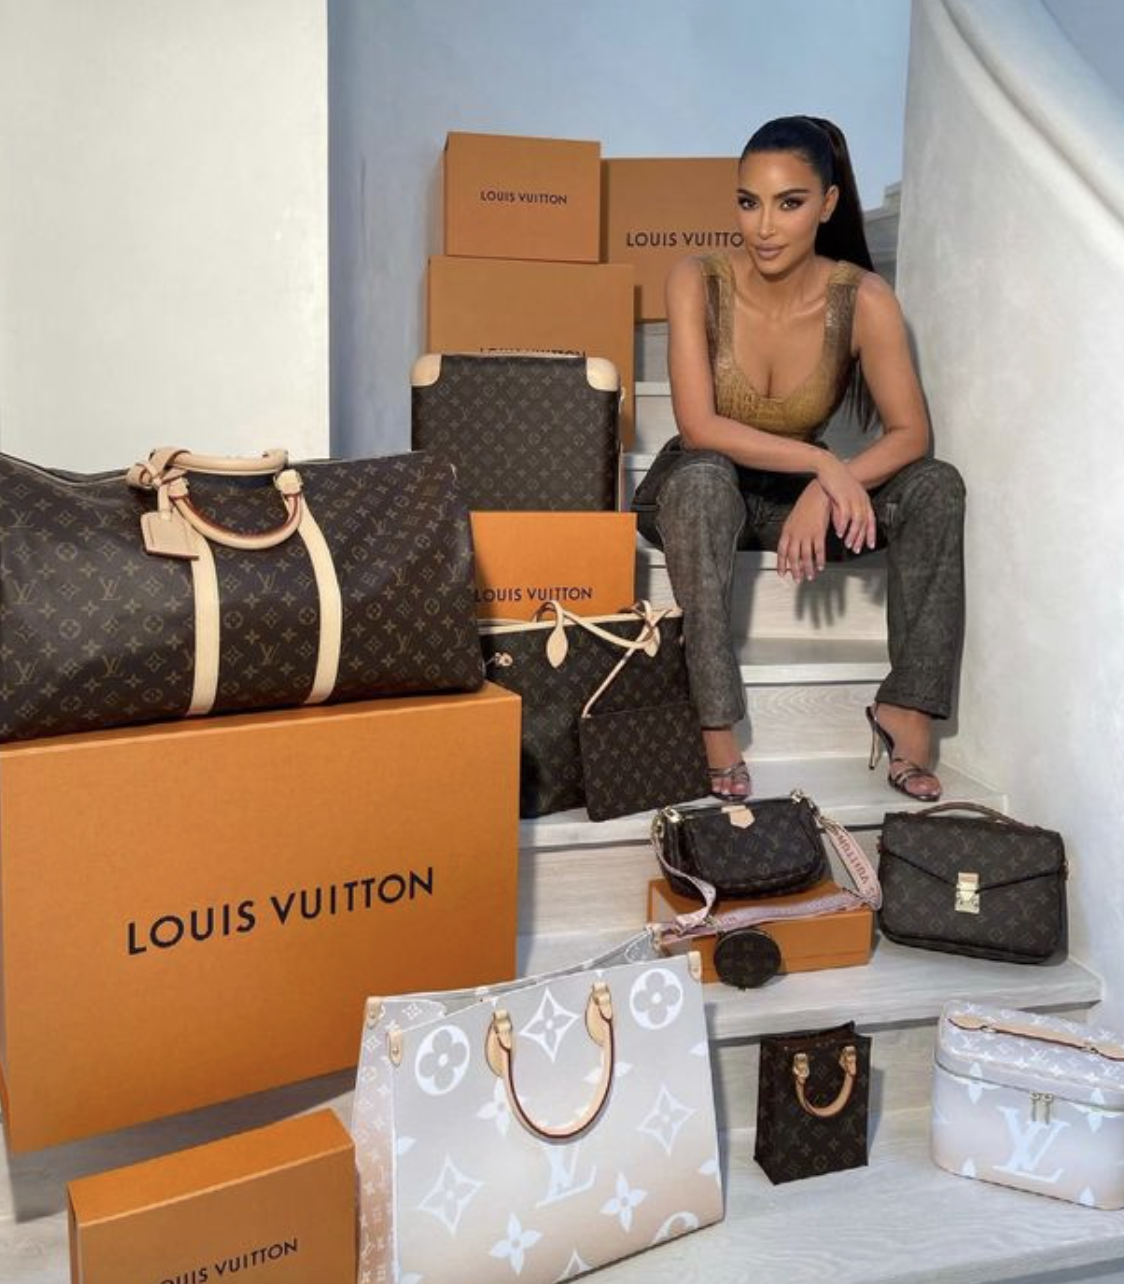 Spandex, Leather and a Lois Vuitton Giveaway